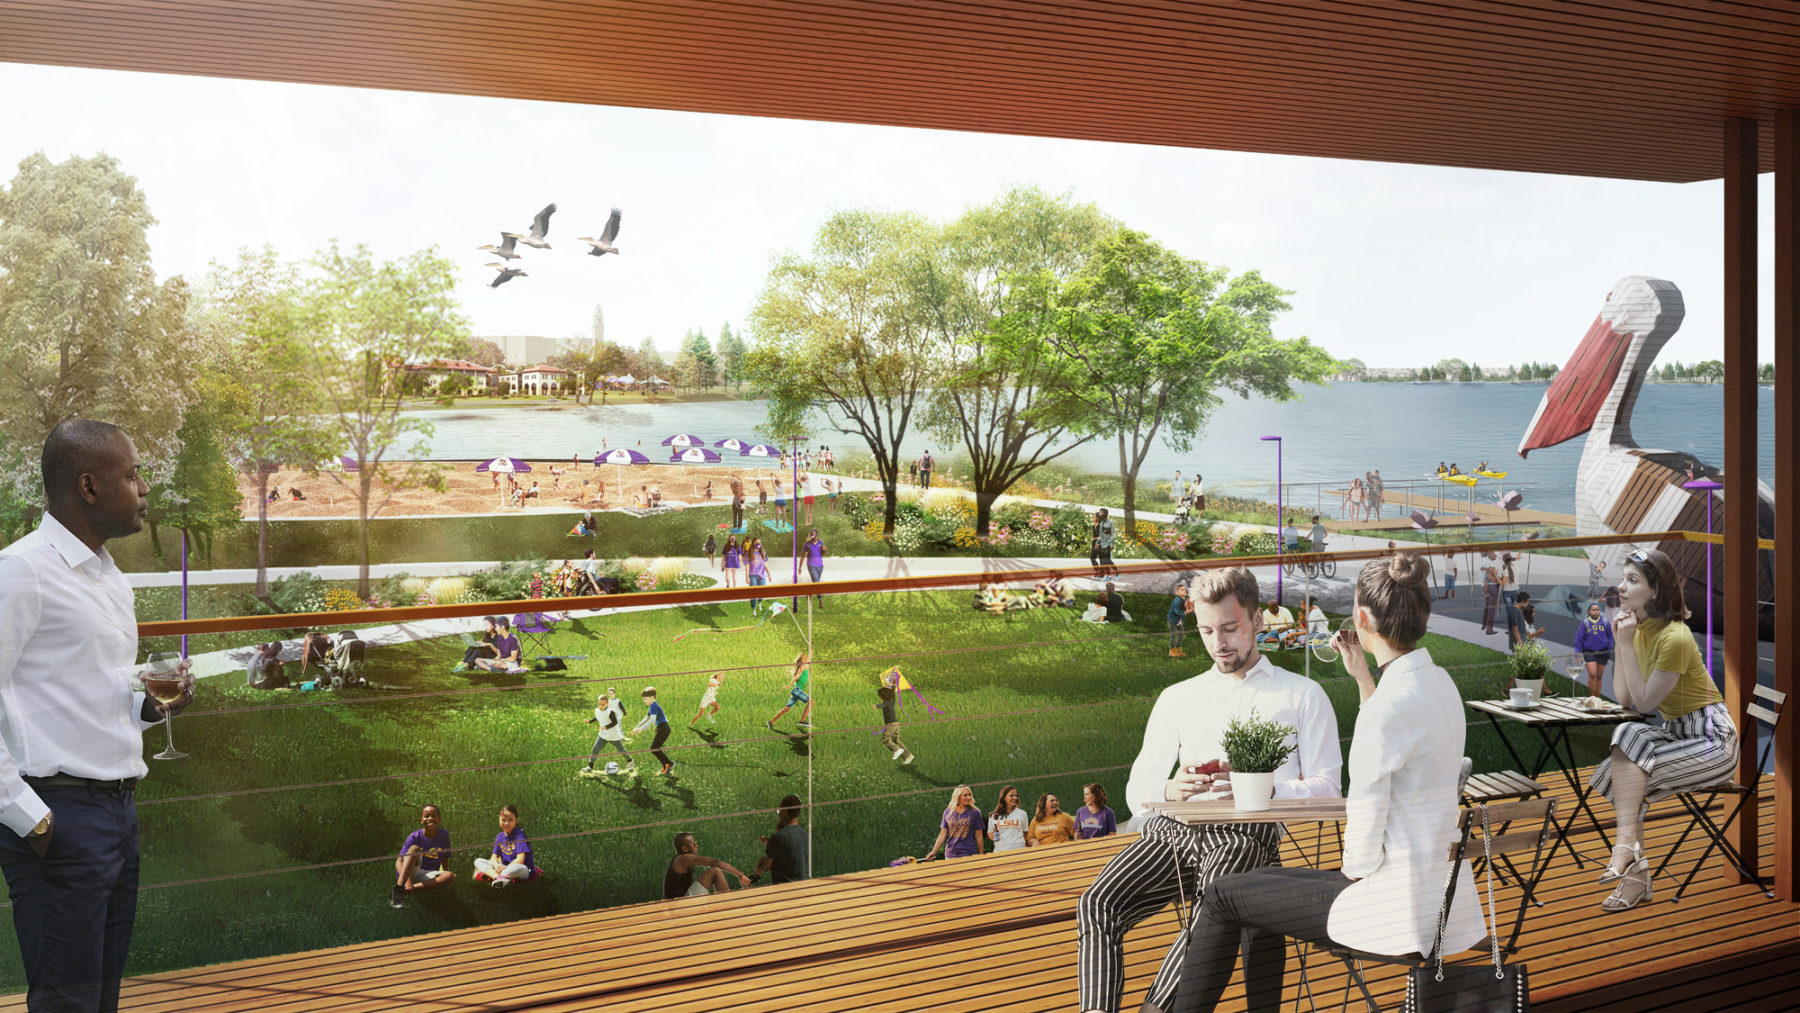 rendering of site vision from pavilion overlooking lakefront. people sit at cafe tables and a large wooden pelican structure is in the background